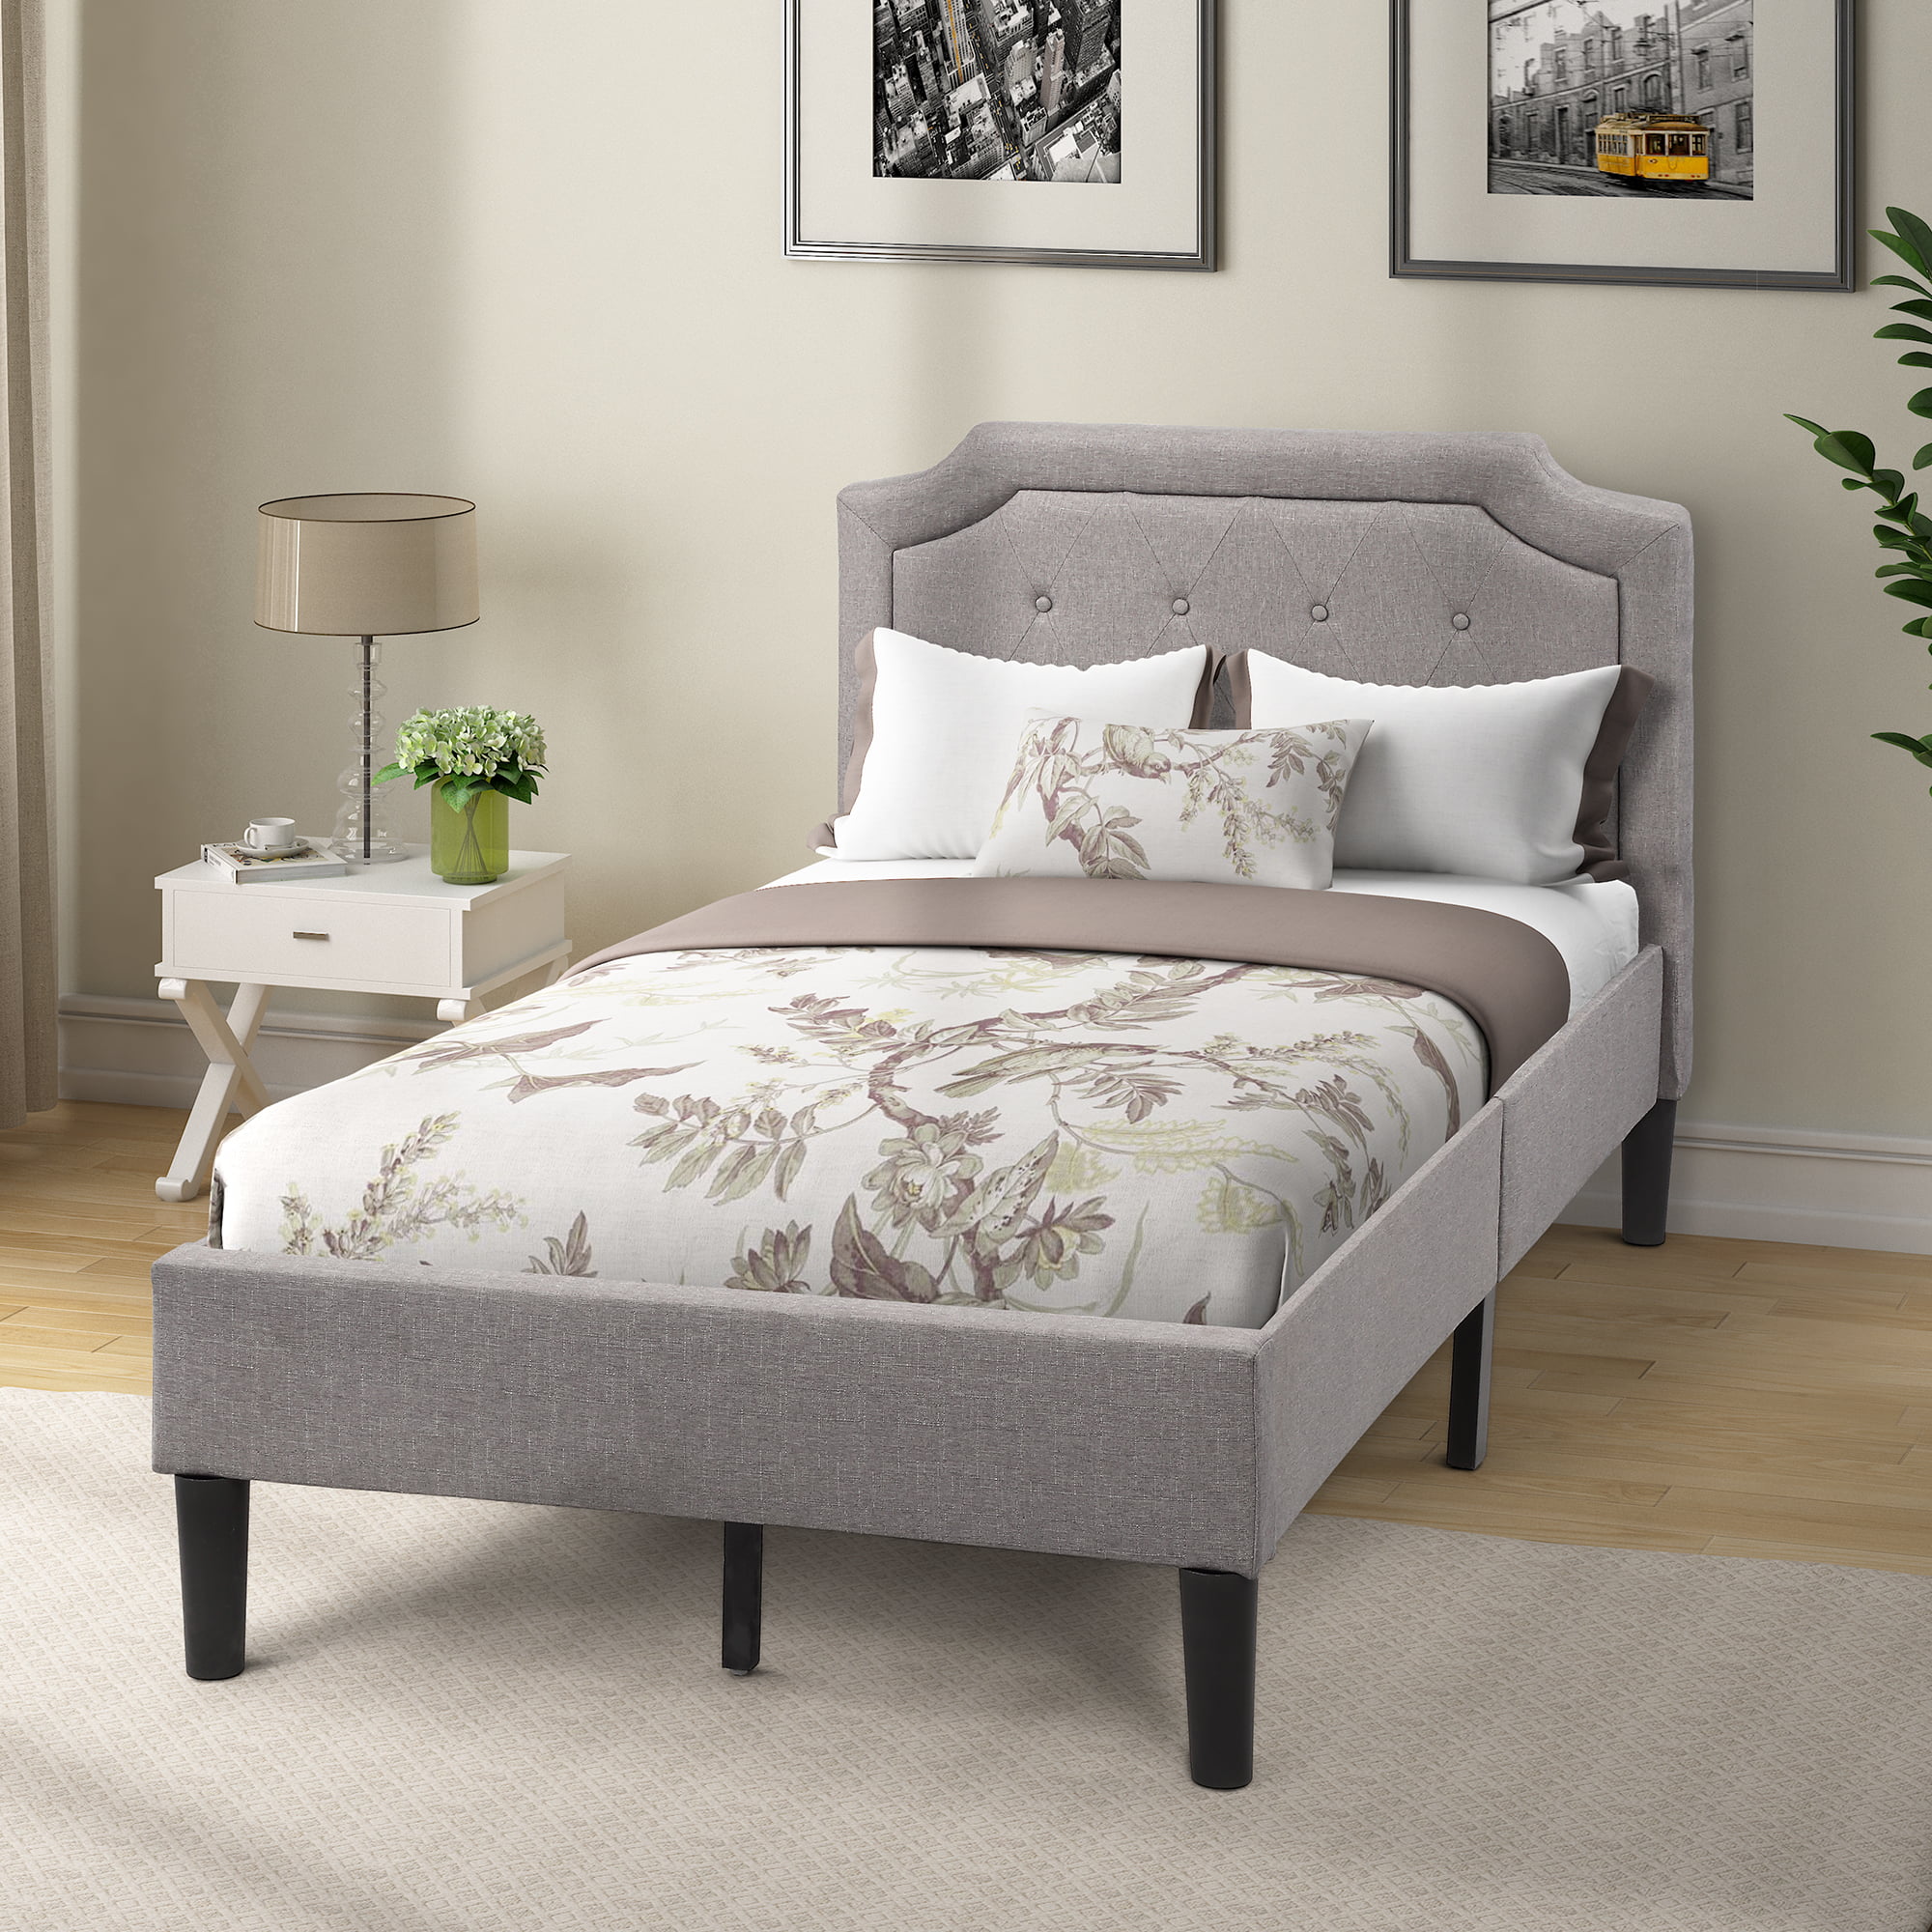 Clearance! Twin Bed Frame No Box Spring Needed, 2020 Newest Upholstered